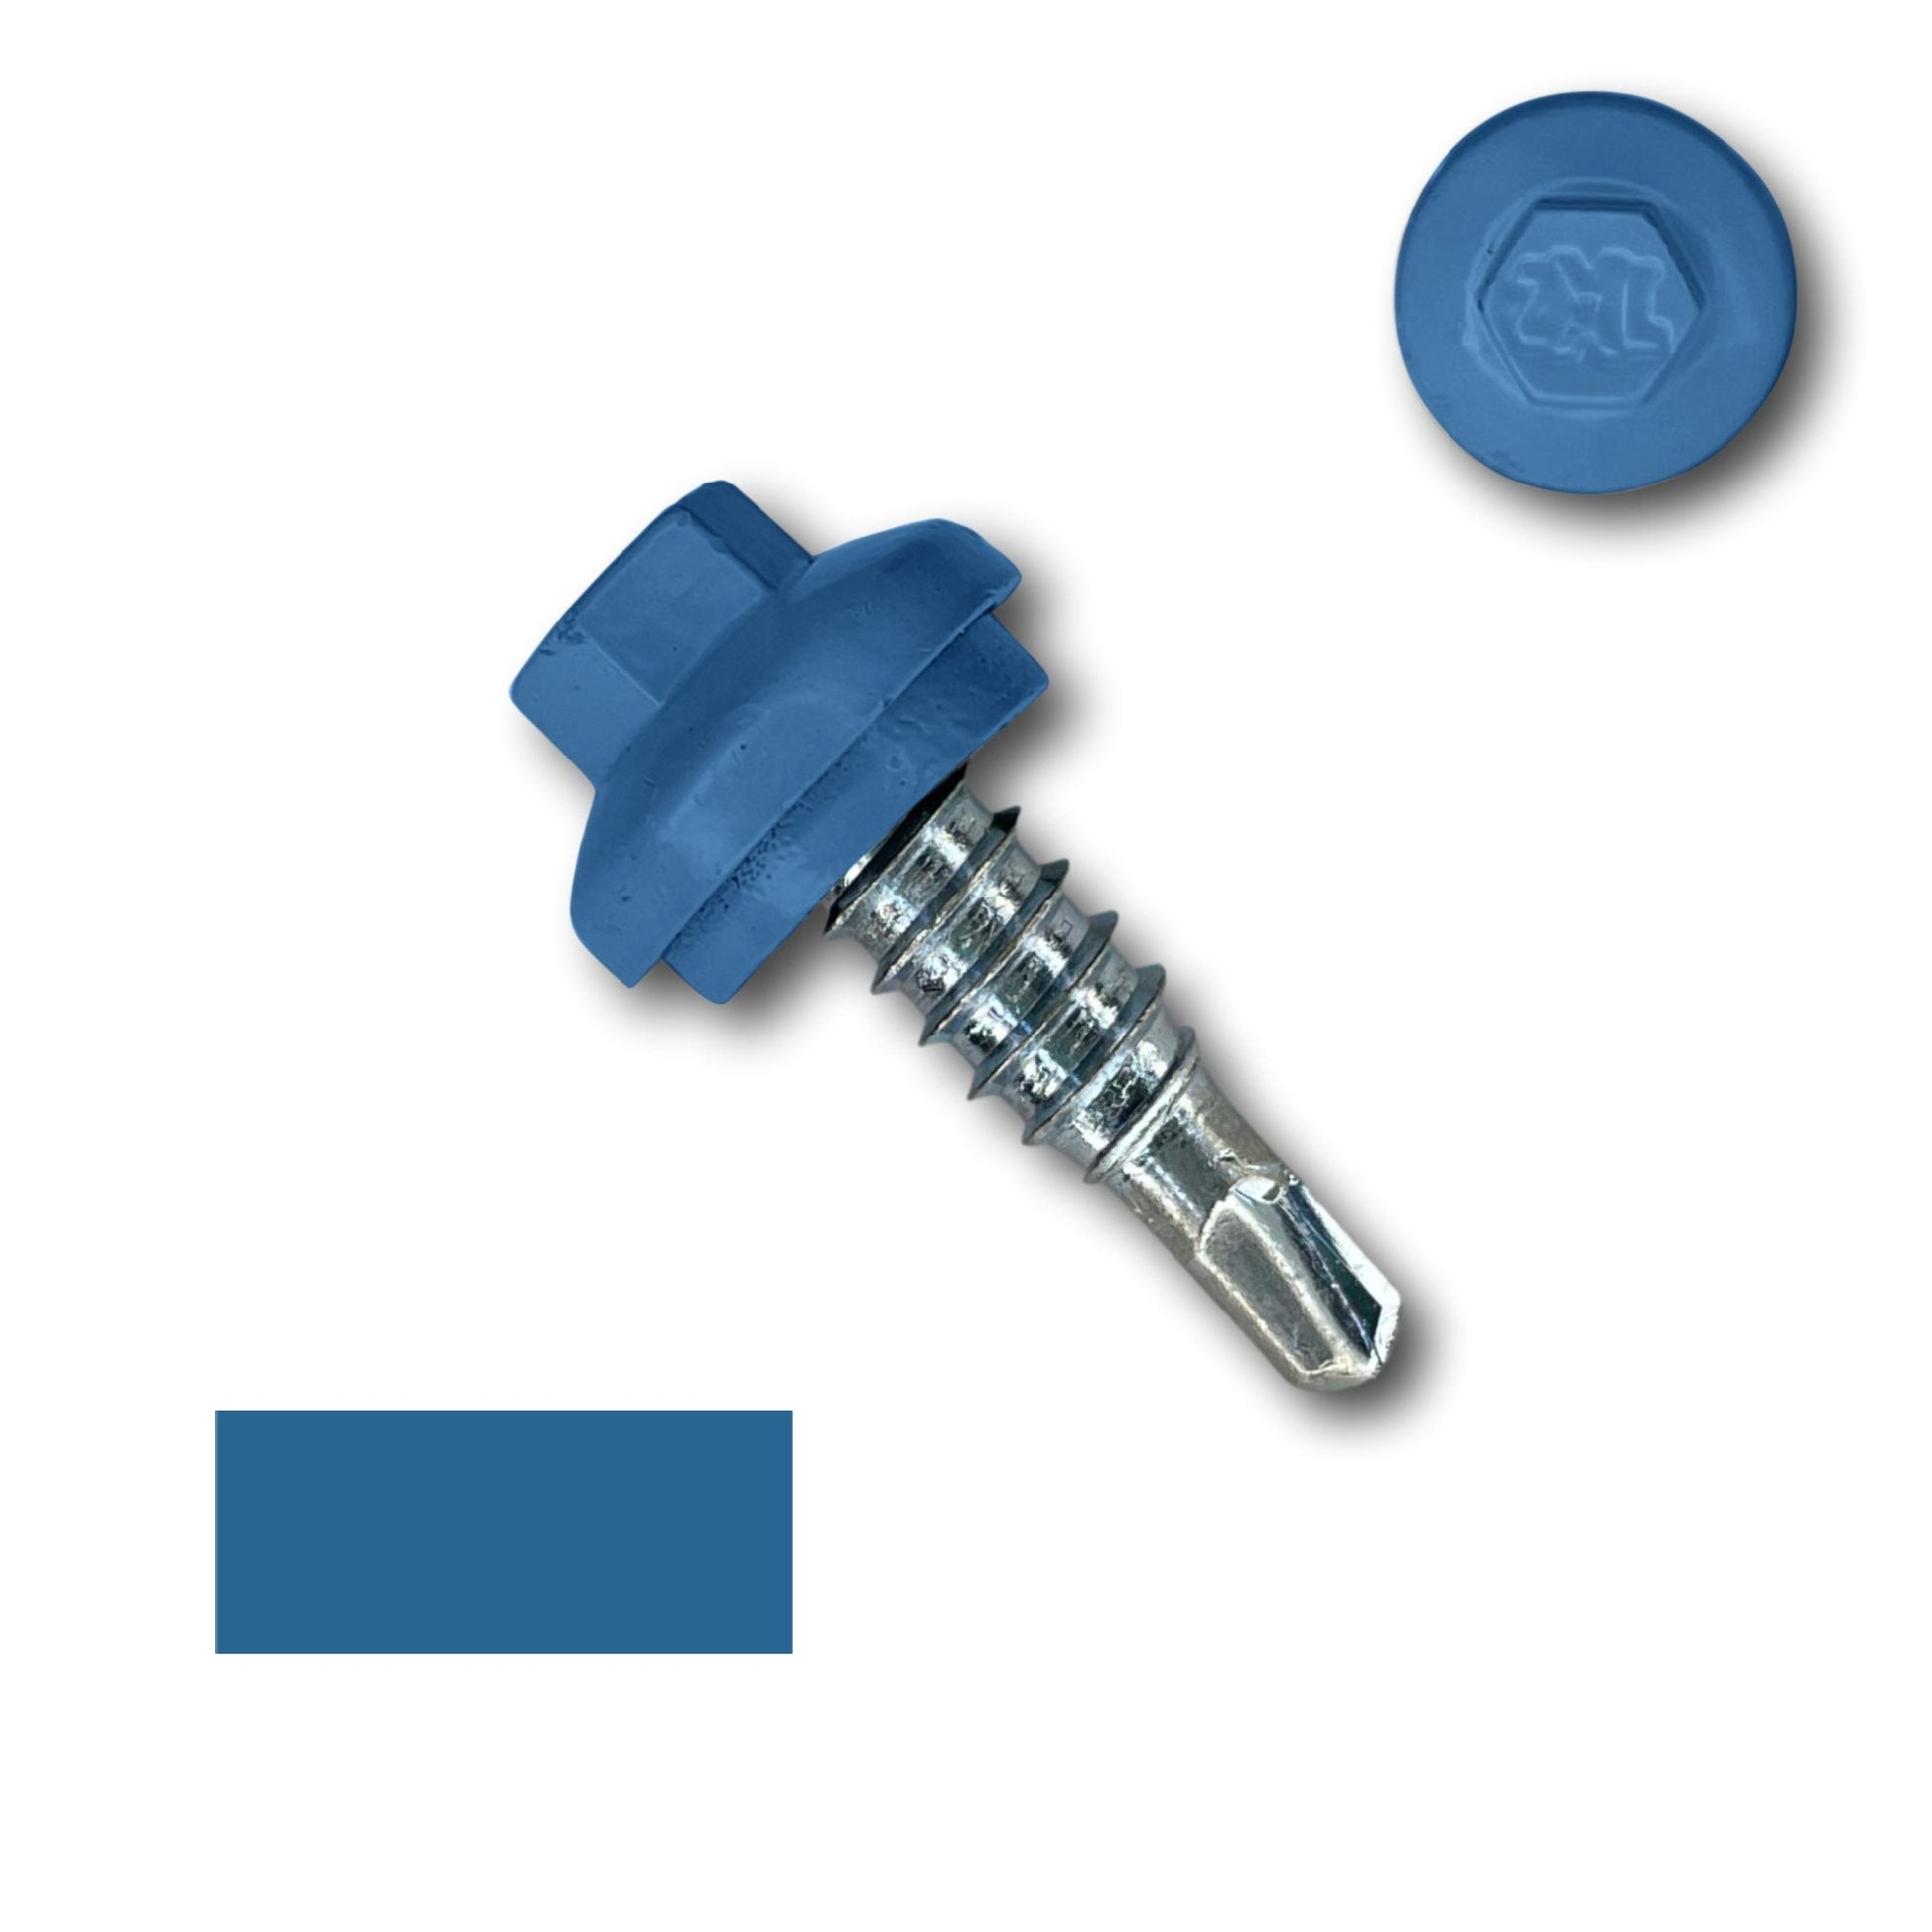 An image showing a blue hex head self-drilling screw with its washer. The head and washer are displayed separately next to the screw. There is also a blue rectangle color swatch placed near the screw components, highlighting secure fastening for various applications using Perma Cover #14 x 7/8" Stitch Lap ZXL Dome Cap Metal Building Screws, Self-Drilling - 250 Pack.